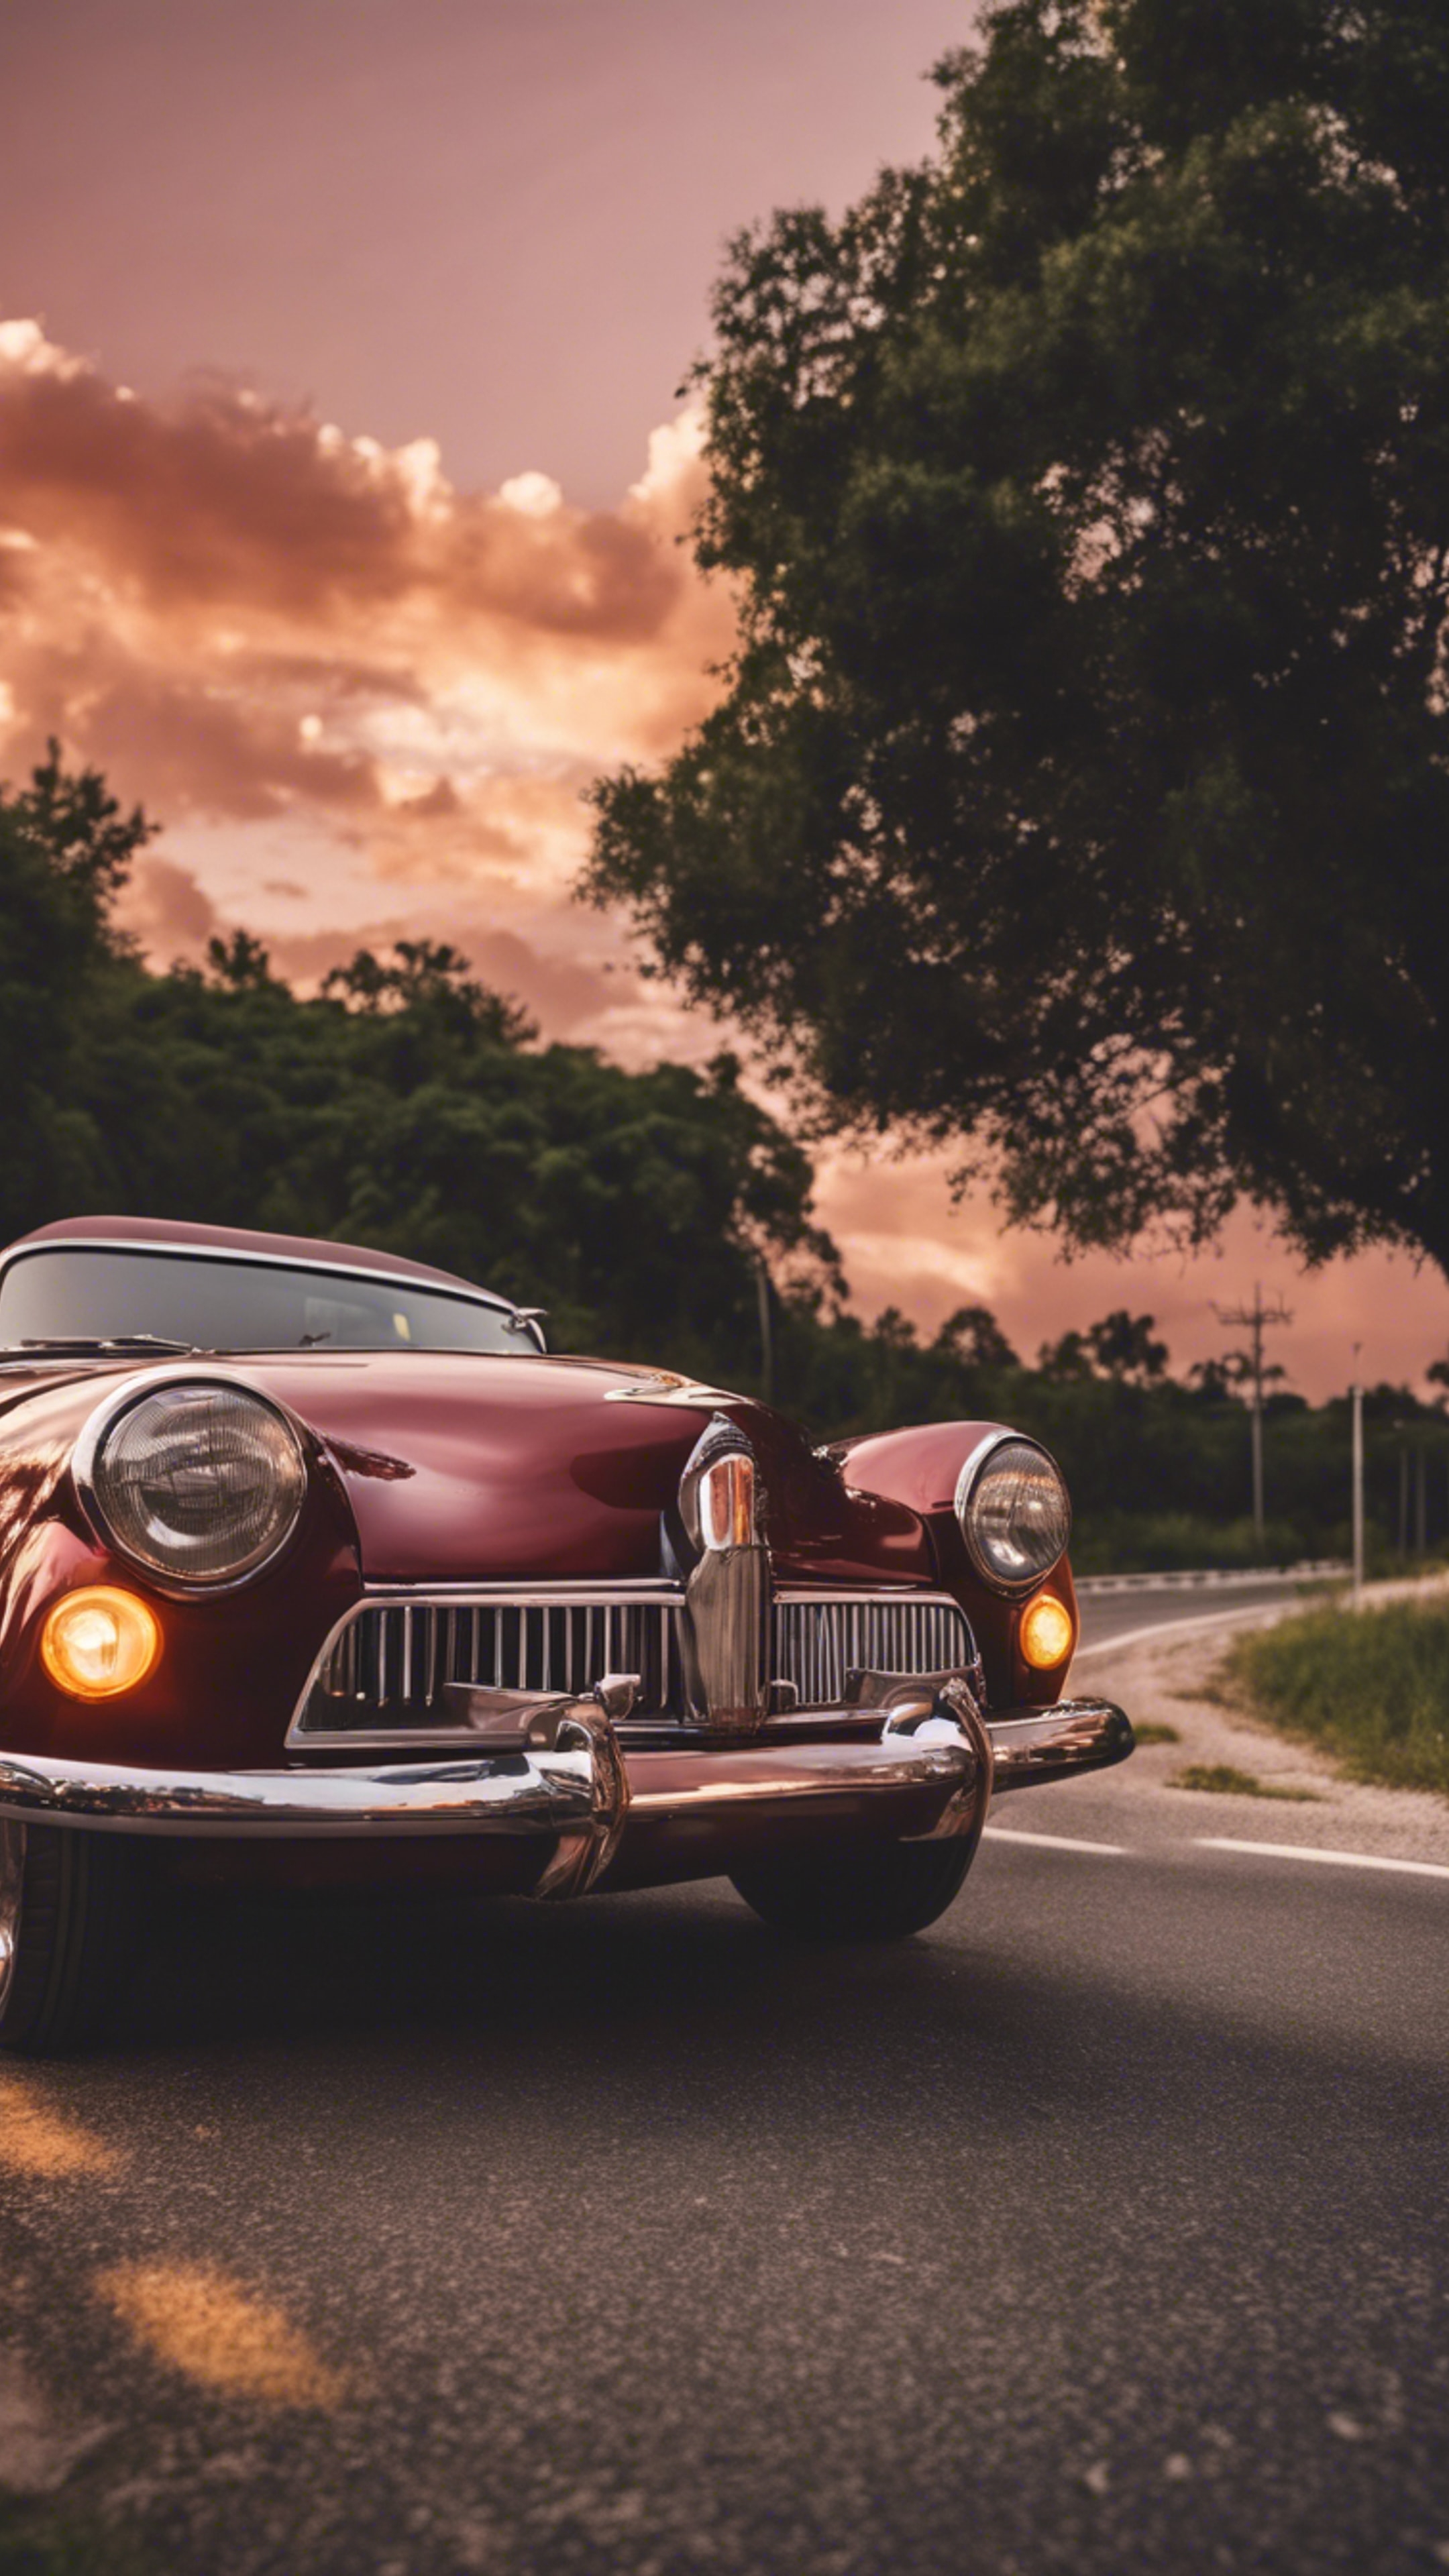 A cool maroon vintage car cruising down a highway during sunset.壁紙[f4173fef60b3476589ab]